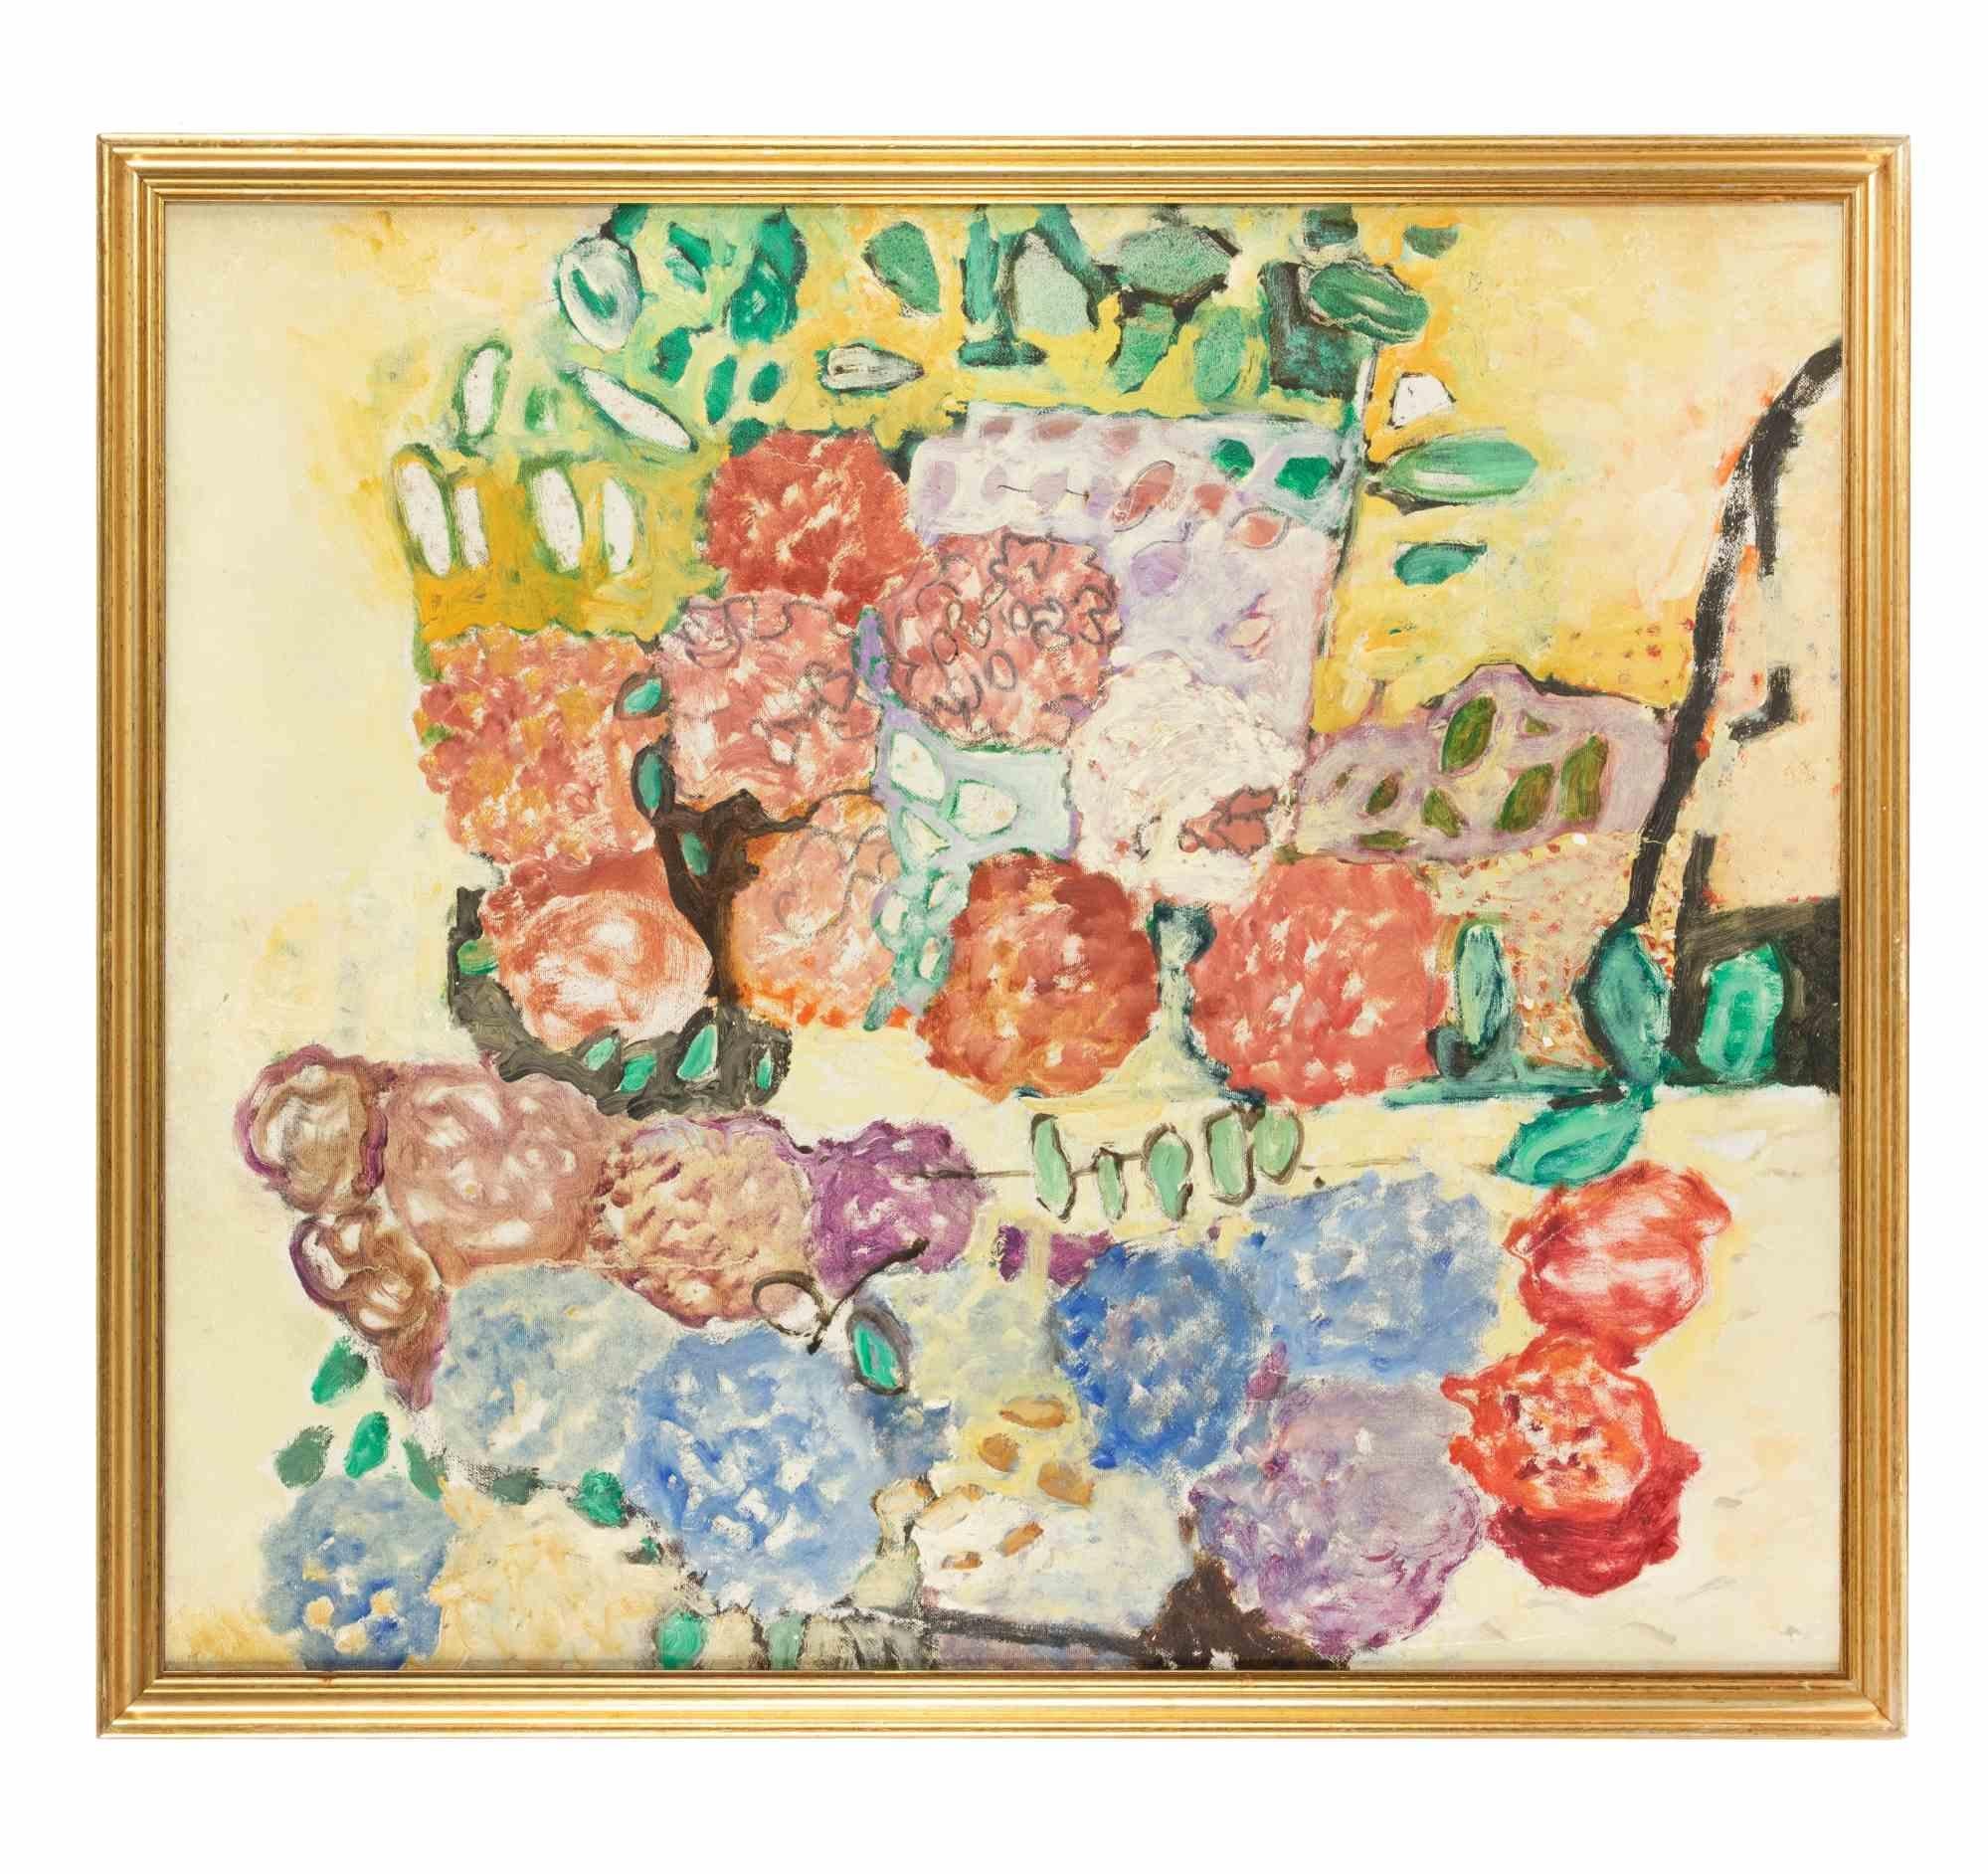 Flowers is a contemporary artwork realized by Mario Asnago.

Hand signed on the lower margin

Mixed colored oil painting on canvas.

Includes frame

Mario Asnago: A renewed architect and painter, he collaborated with Claudio Vender. The first works